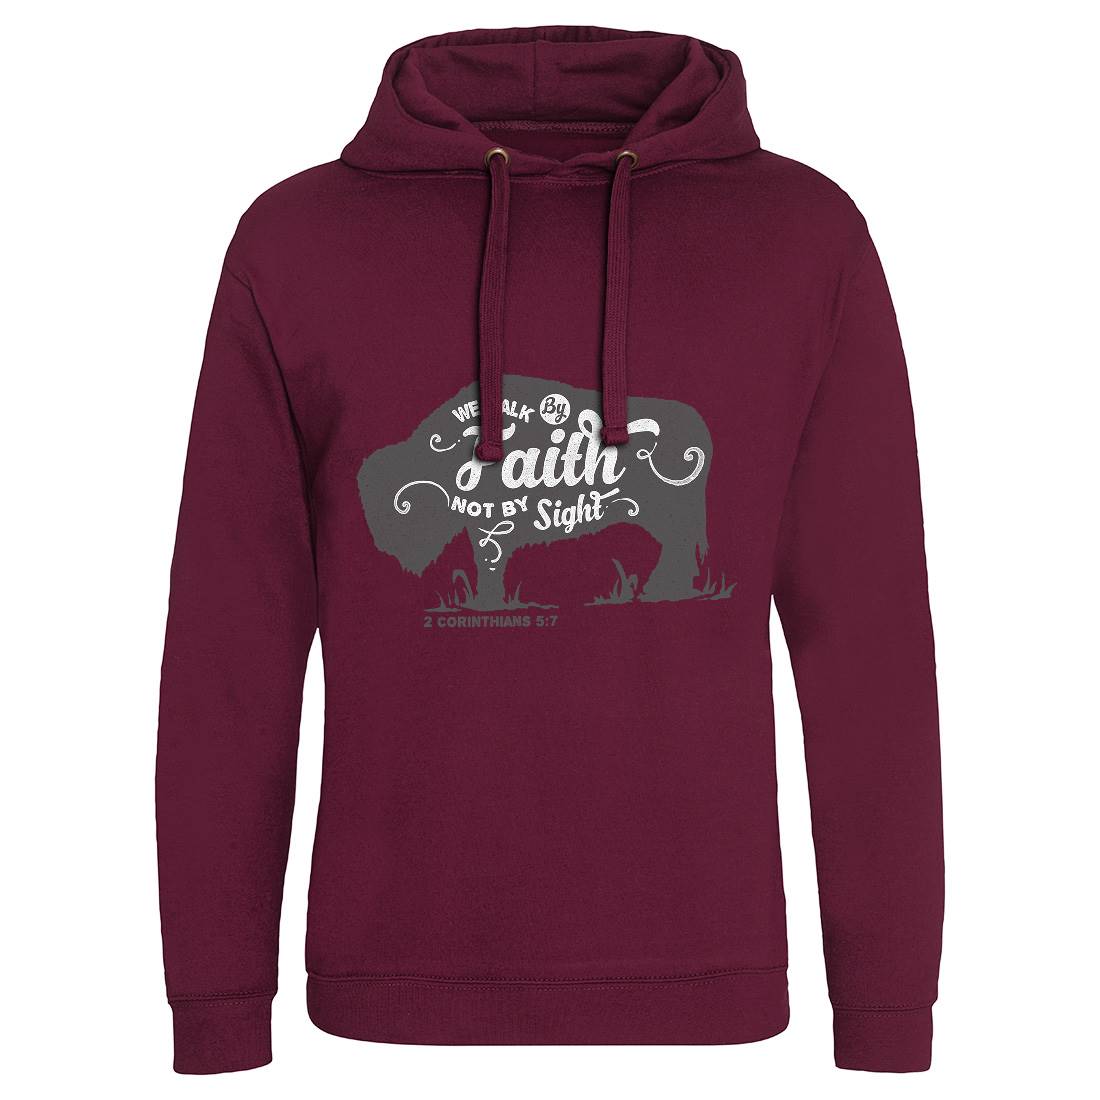 We Walk By Faith Mens Hoodie Without Pocket Religion A392